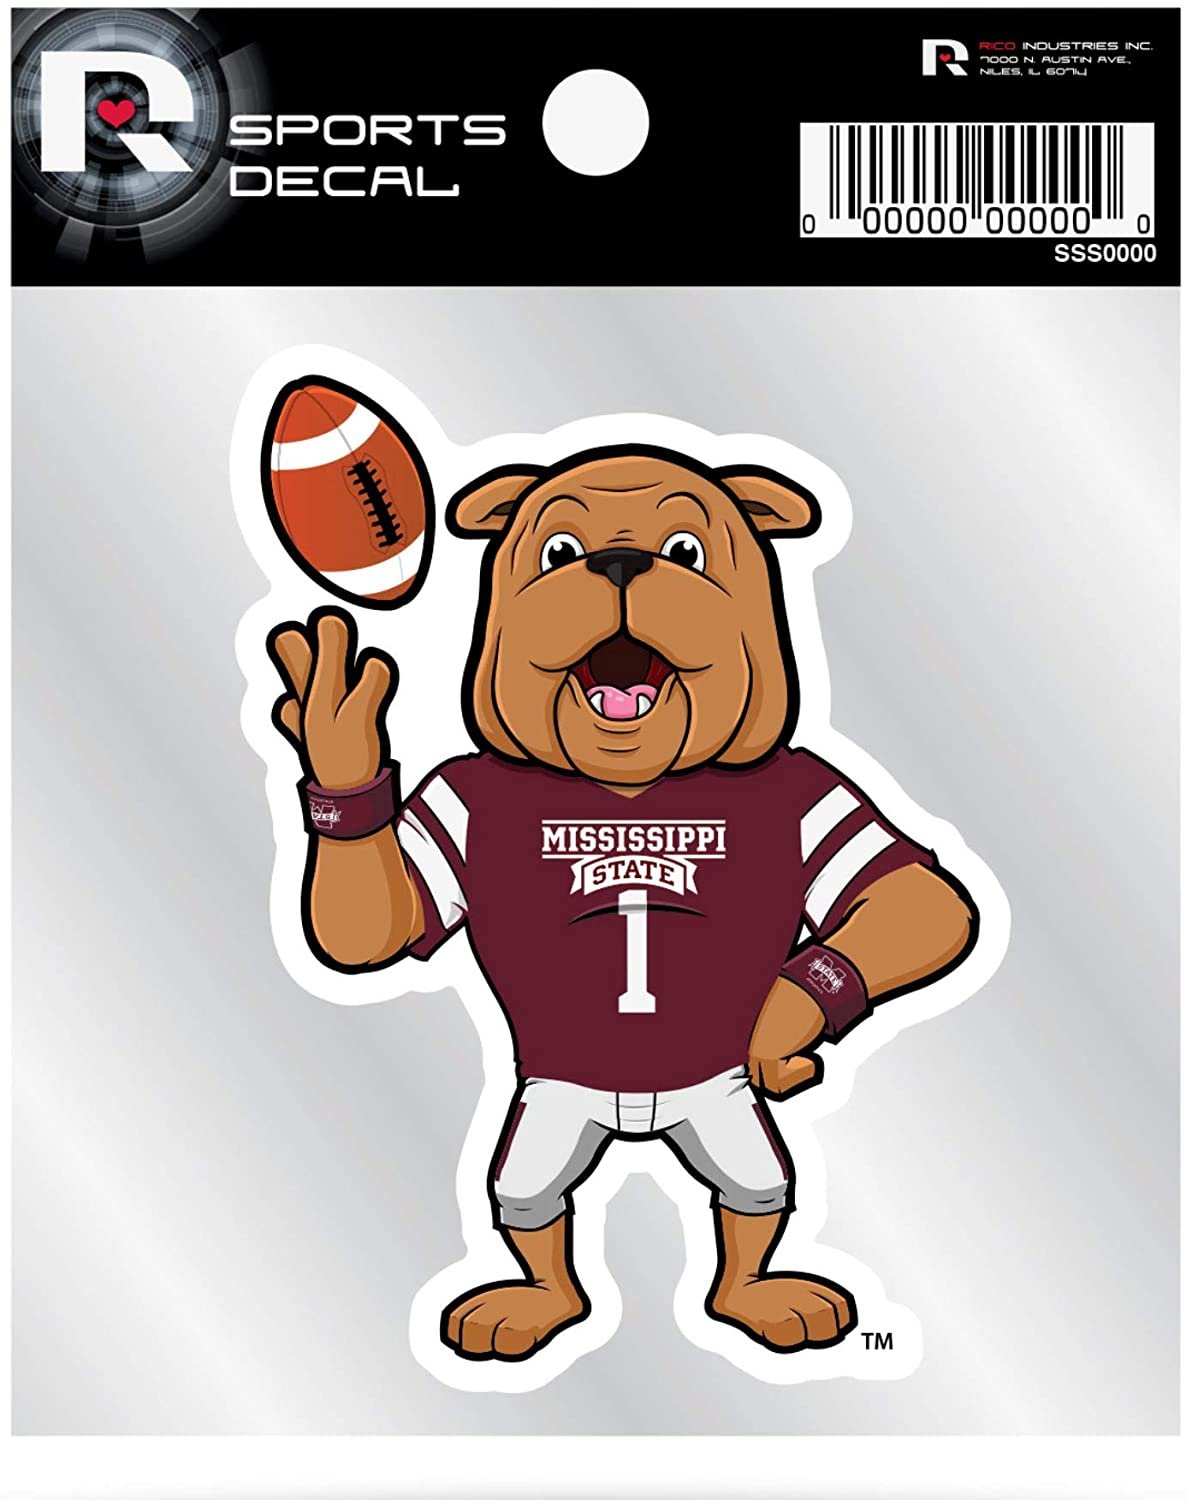 Mississippi State Bulldogs Mascot Premium 4x4 Decal with Clear Backing Flat Vinyl Auto Home Sticker University of